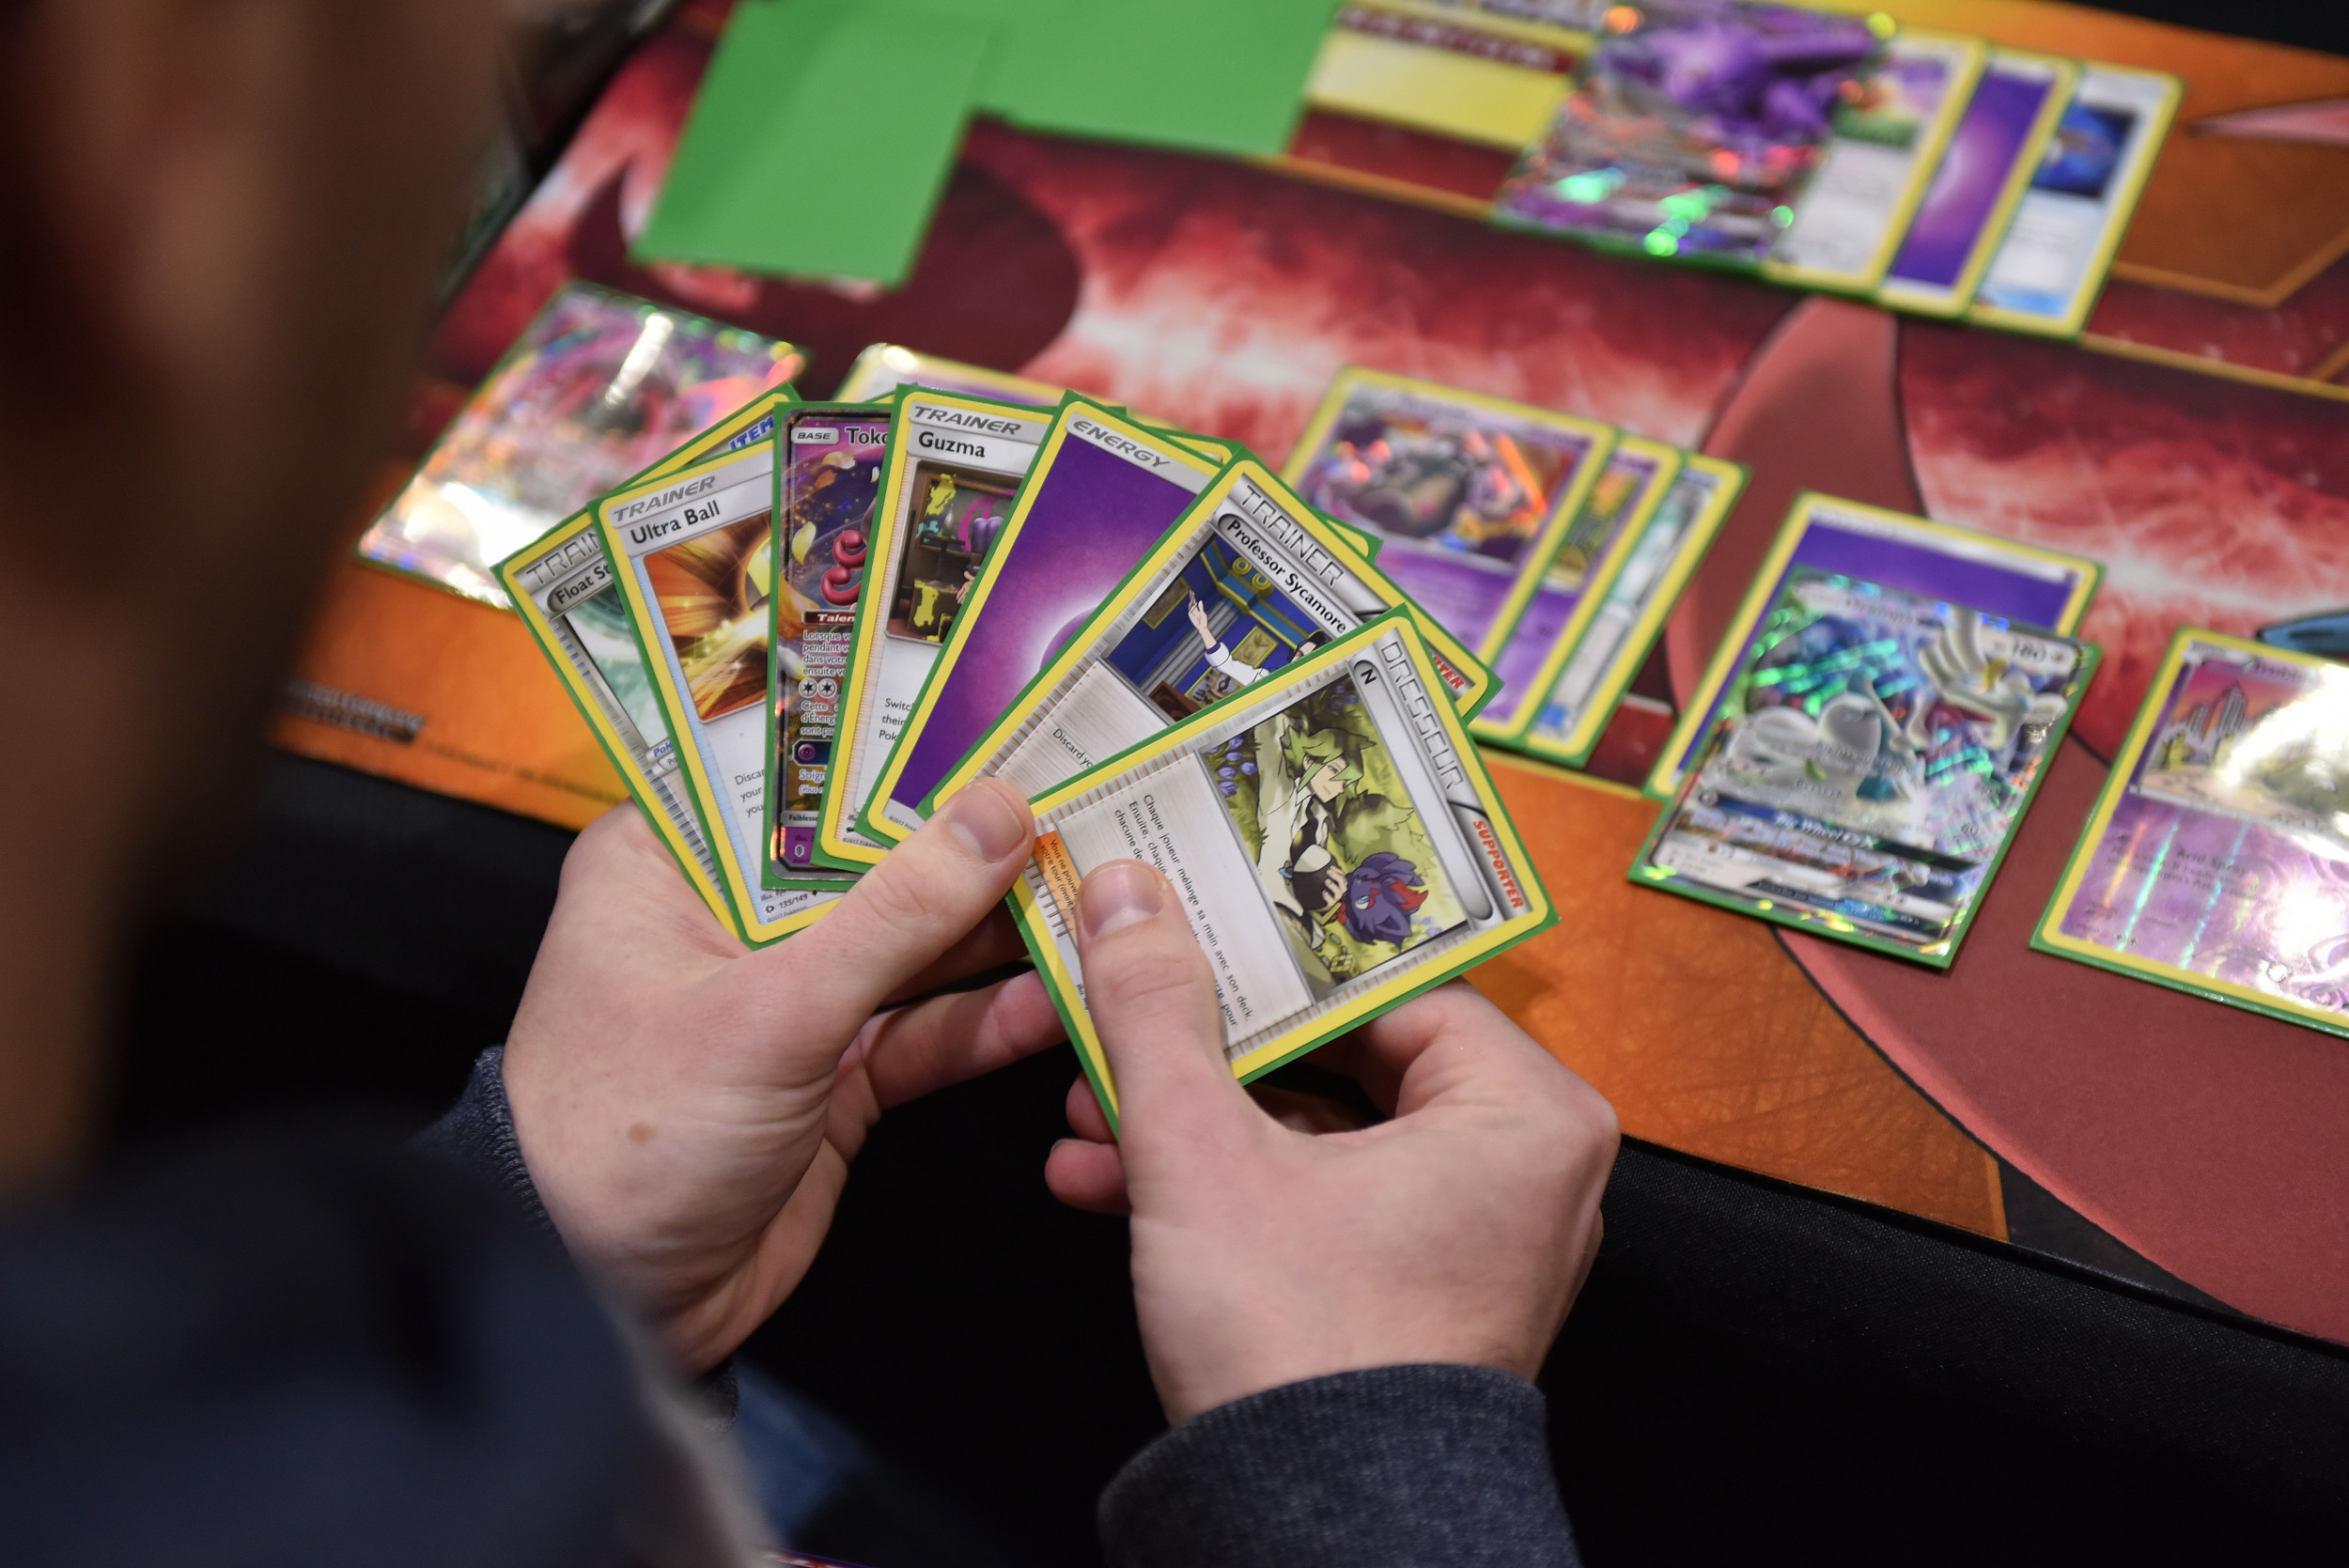 Pokemon cards for free? Almost, but they're all under $2